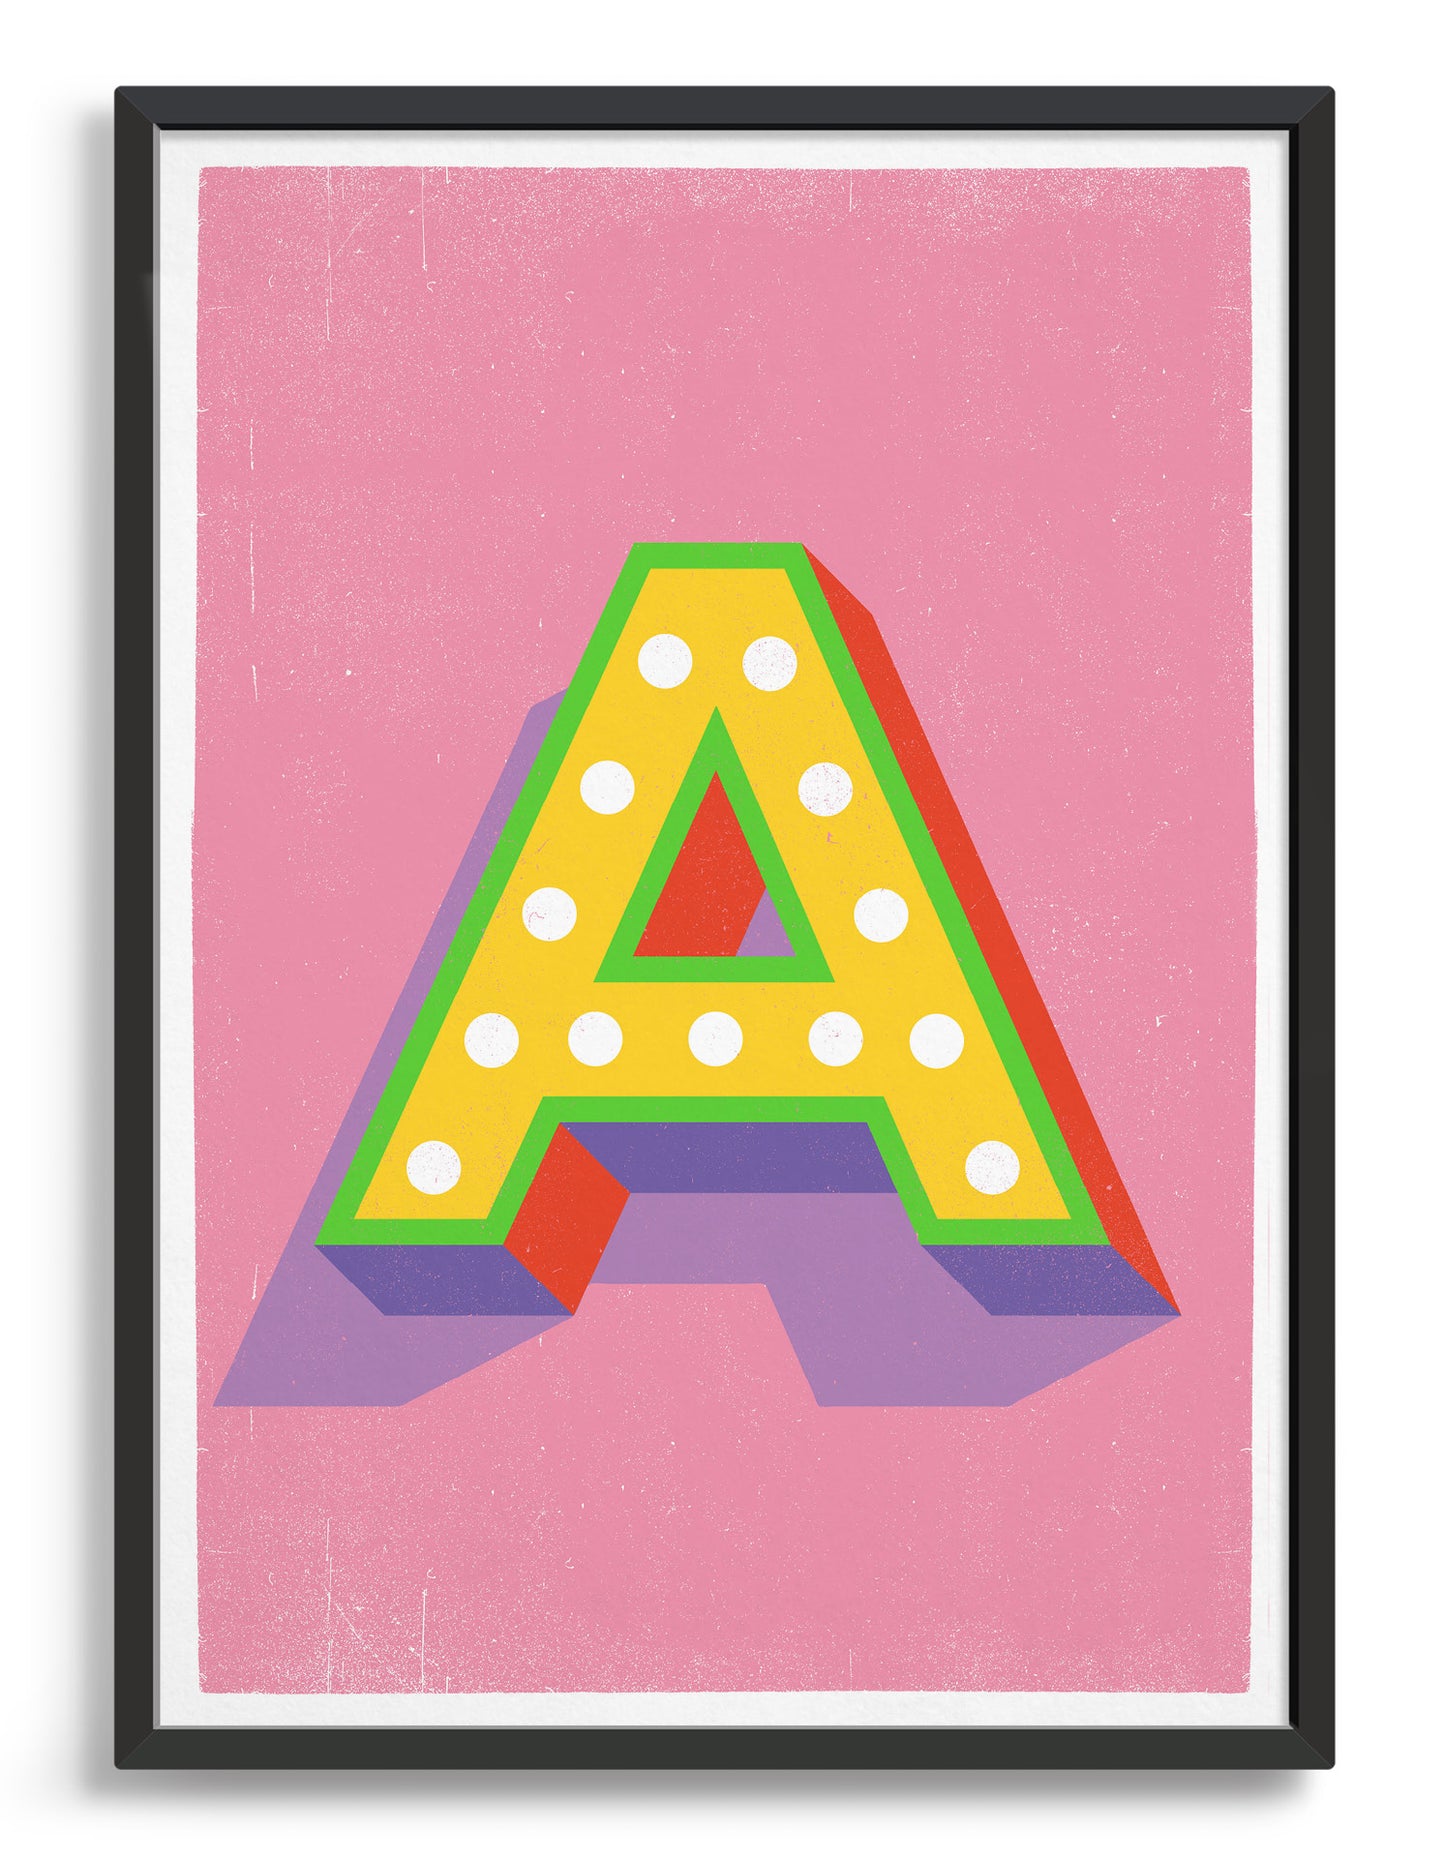 Alphabet print - lights on font in yellow against a pink background - letter a